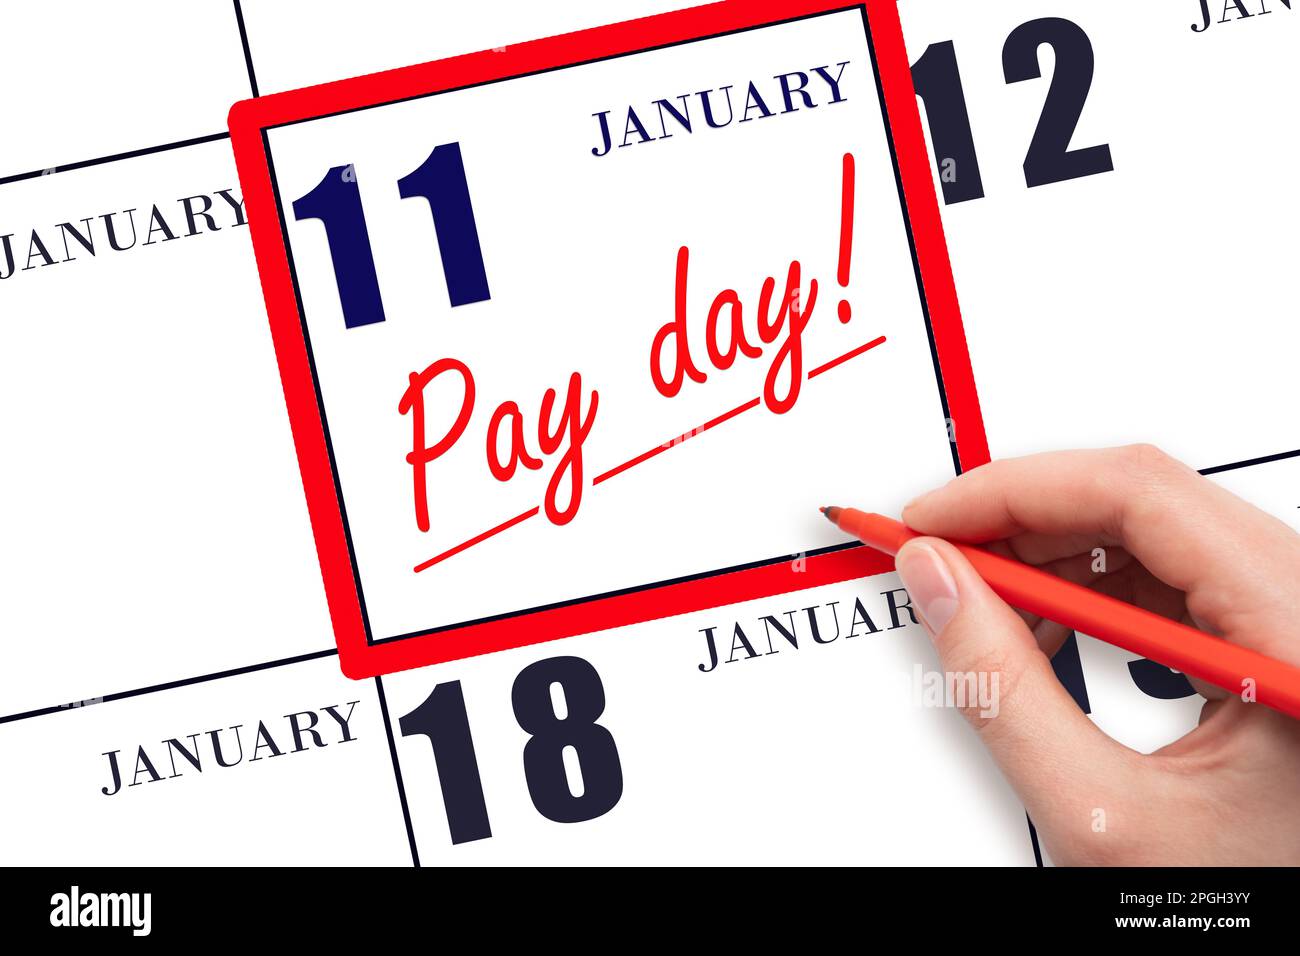 11th day of January. Hand writing text PAY DATE on calendar date January 11 and underline it. Payment due date. Reminder concept of payment. Winter mo Stock Photo